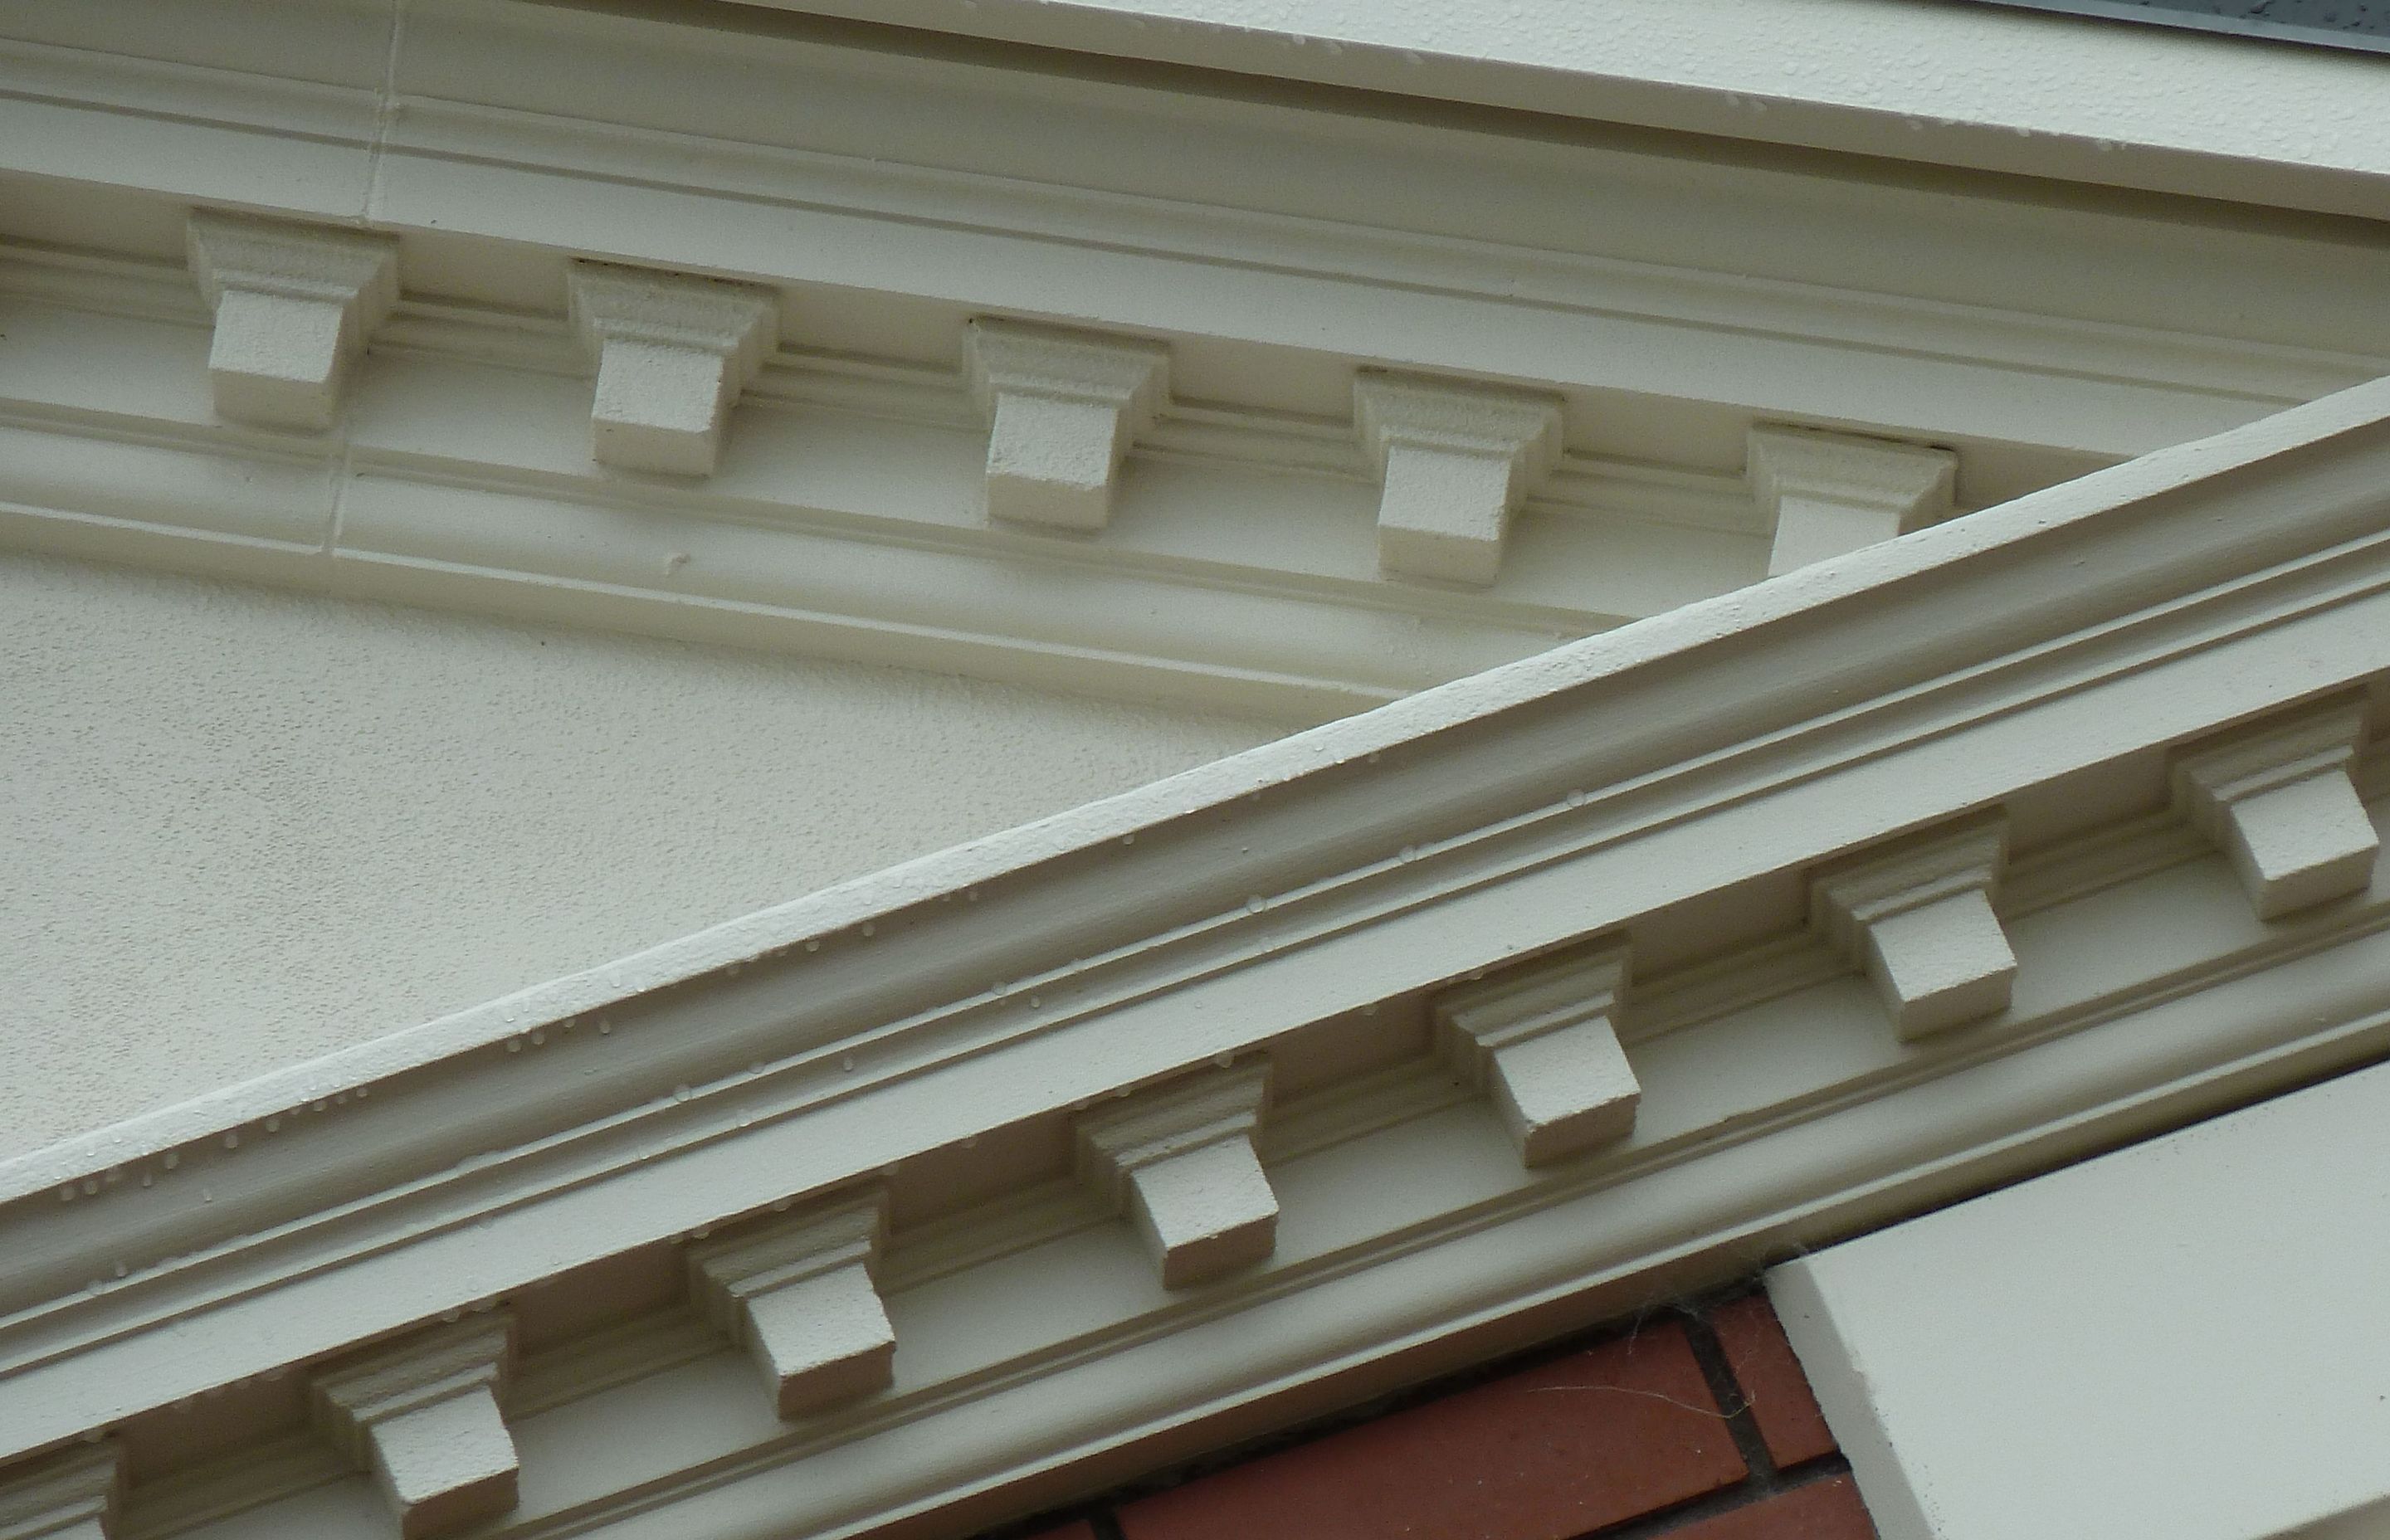 The addition of decorative mouldings can create value — and not just in an aesthetic regard.